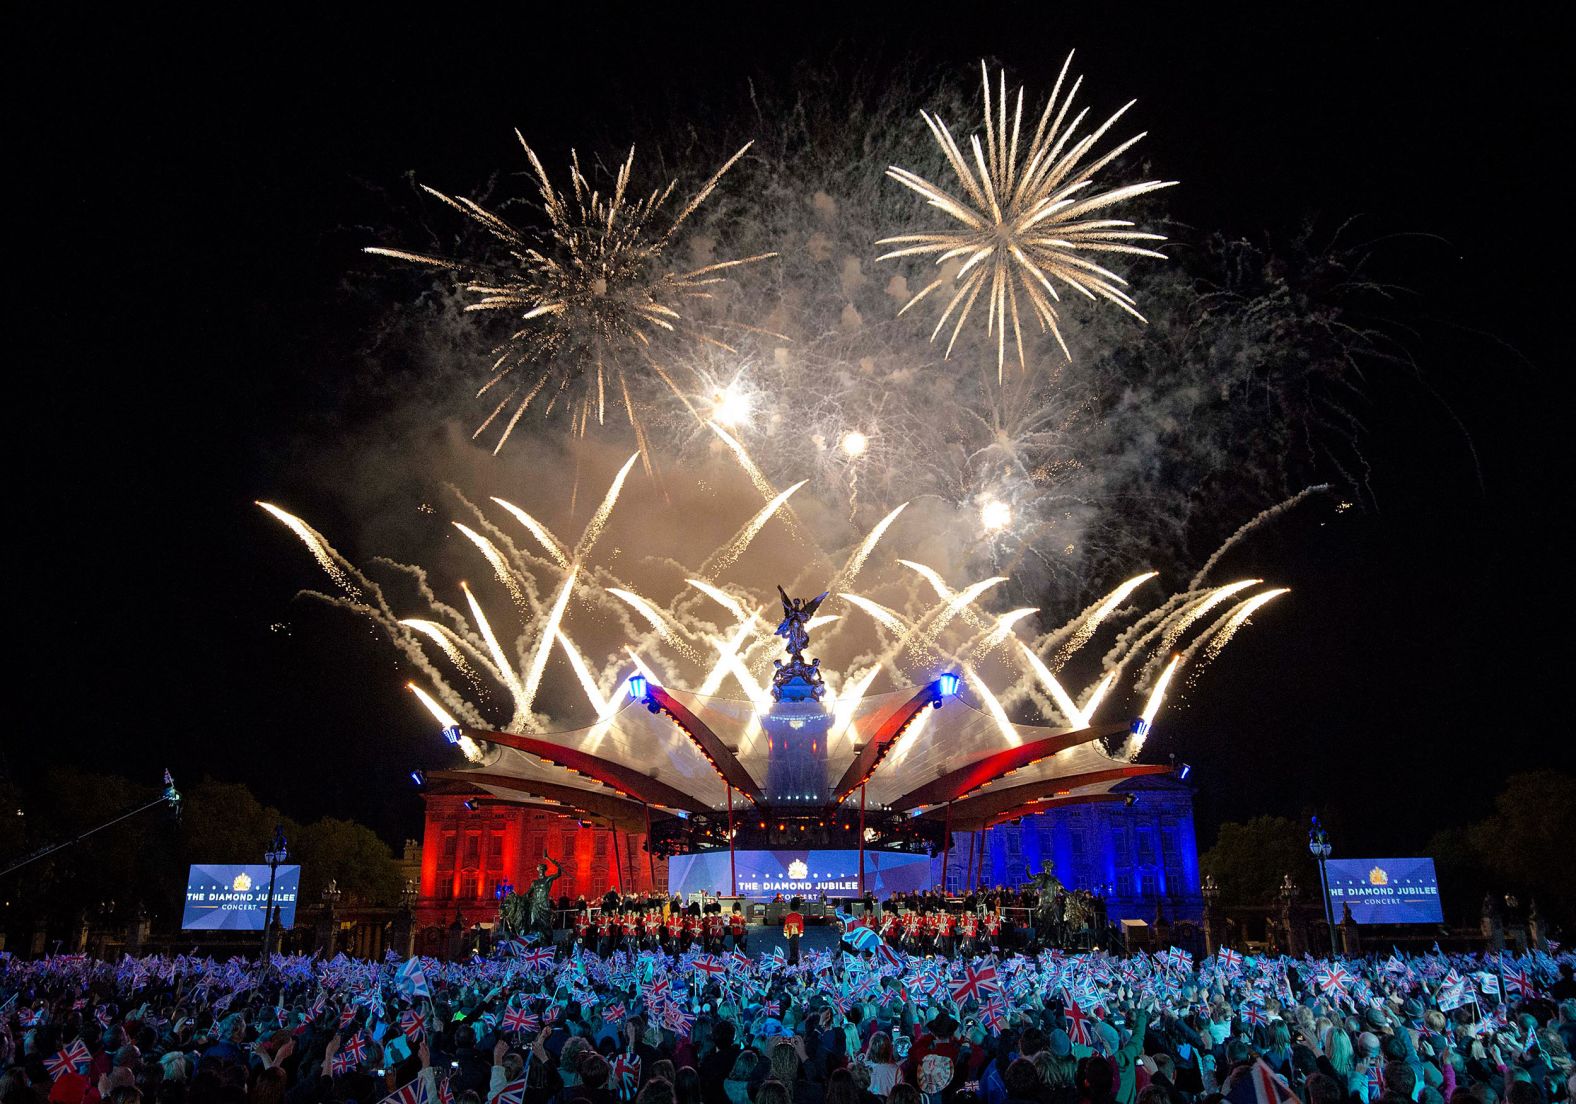 Fireworks light up the palace during a star-studded Diamond Jubilee concert organized by Take That singer and songwriter Gary Barlow. The Queen made a regal appearance but without Prince Philip, who <del> </del>was <a href="index.php?page=&url=https%3A%2F%2Fedition.cnn.com%2F2012%2F06%2F09%2Fworld%2Feurope%2Fuk-prince-philip%2Findex.html" target="_blank">hospitalized</a> just hours earlier. 